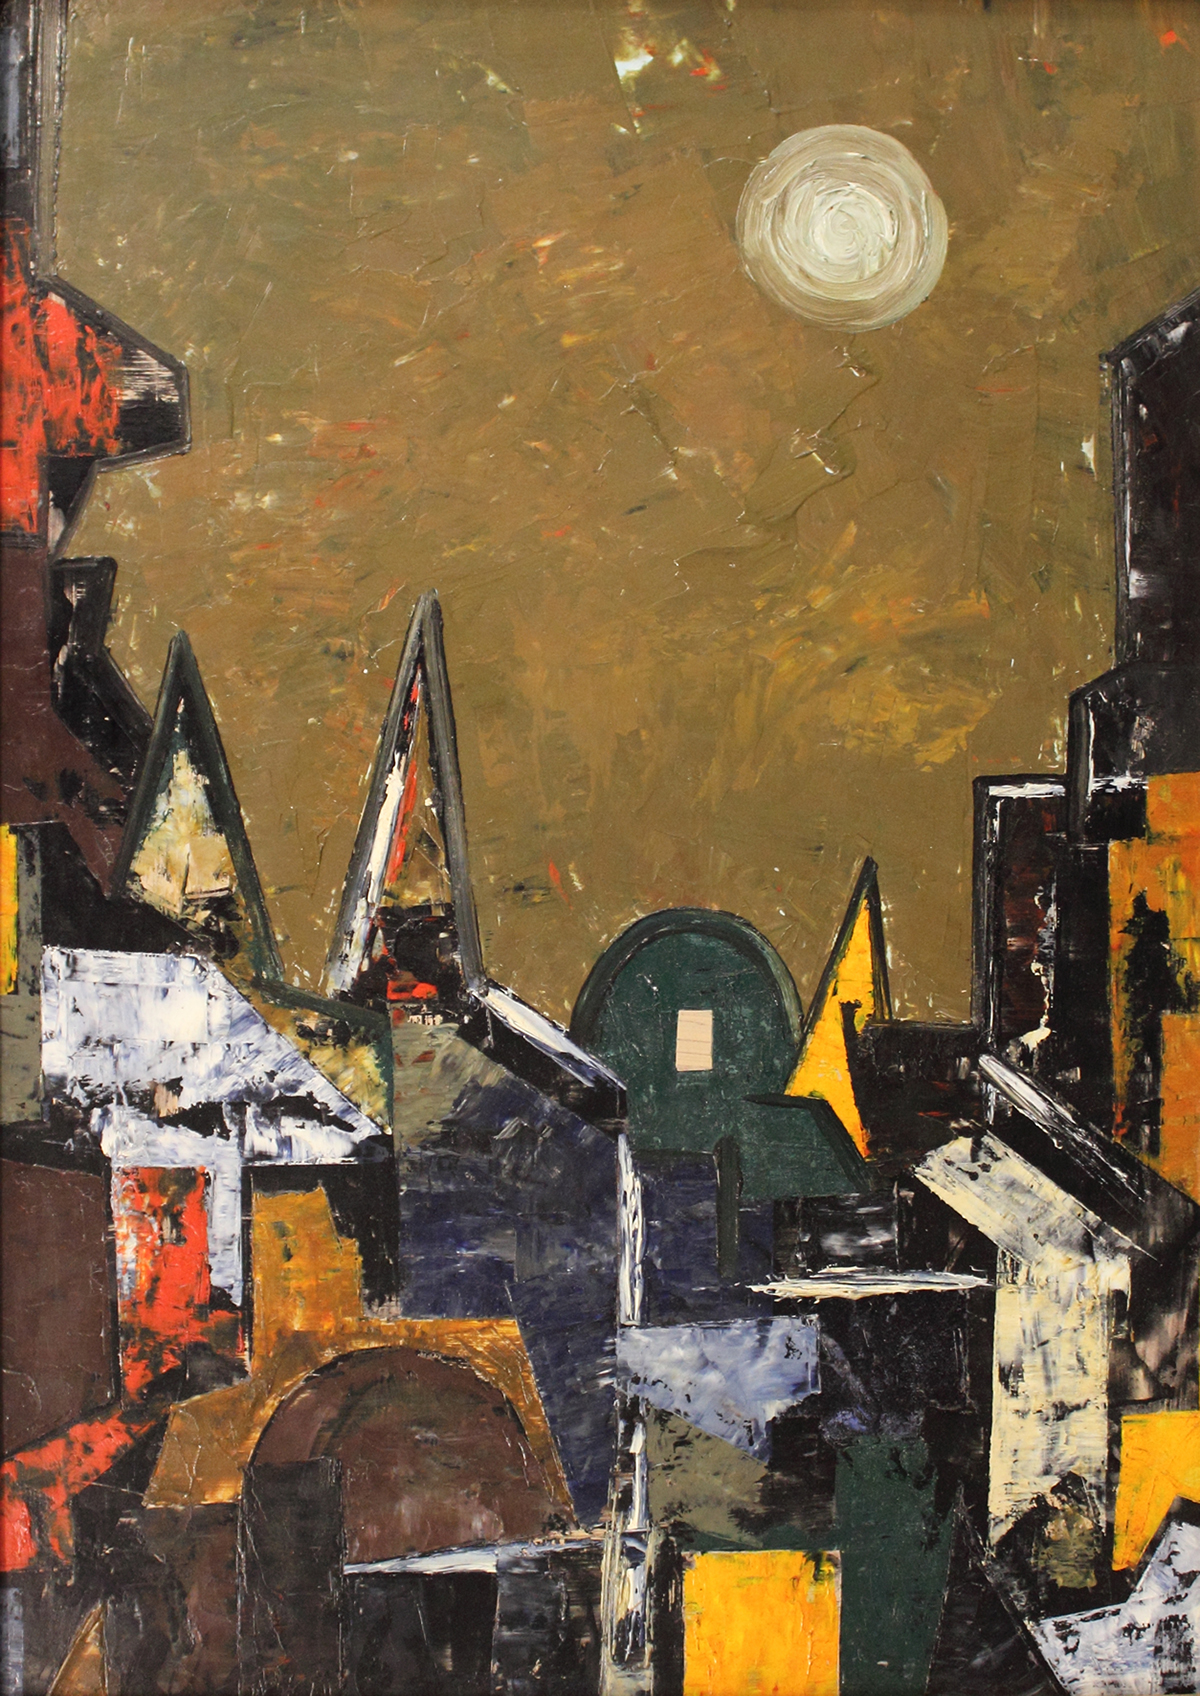 Image of Ribeiro's Untitled (Townscape), 1962.